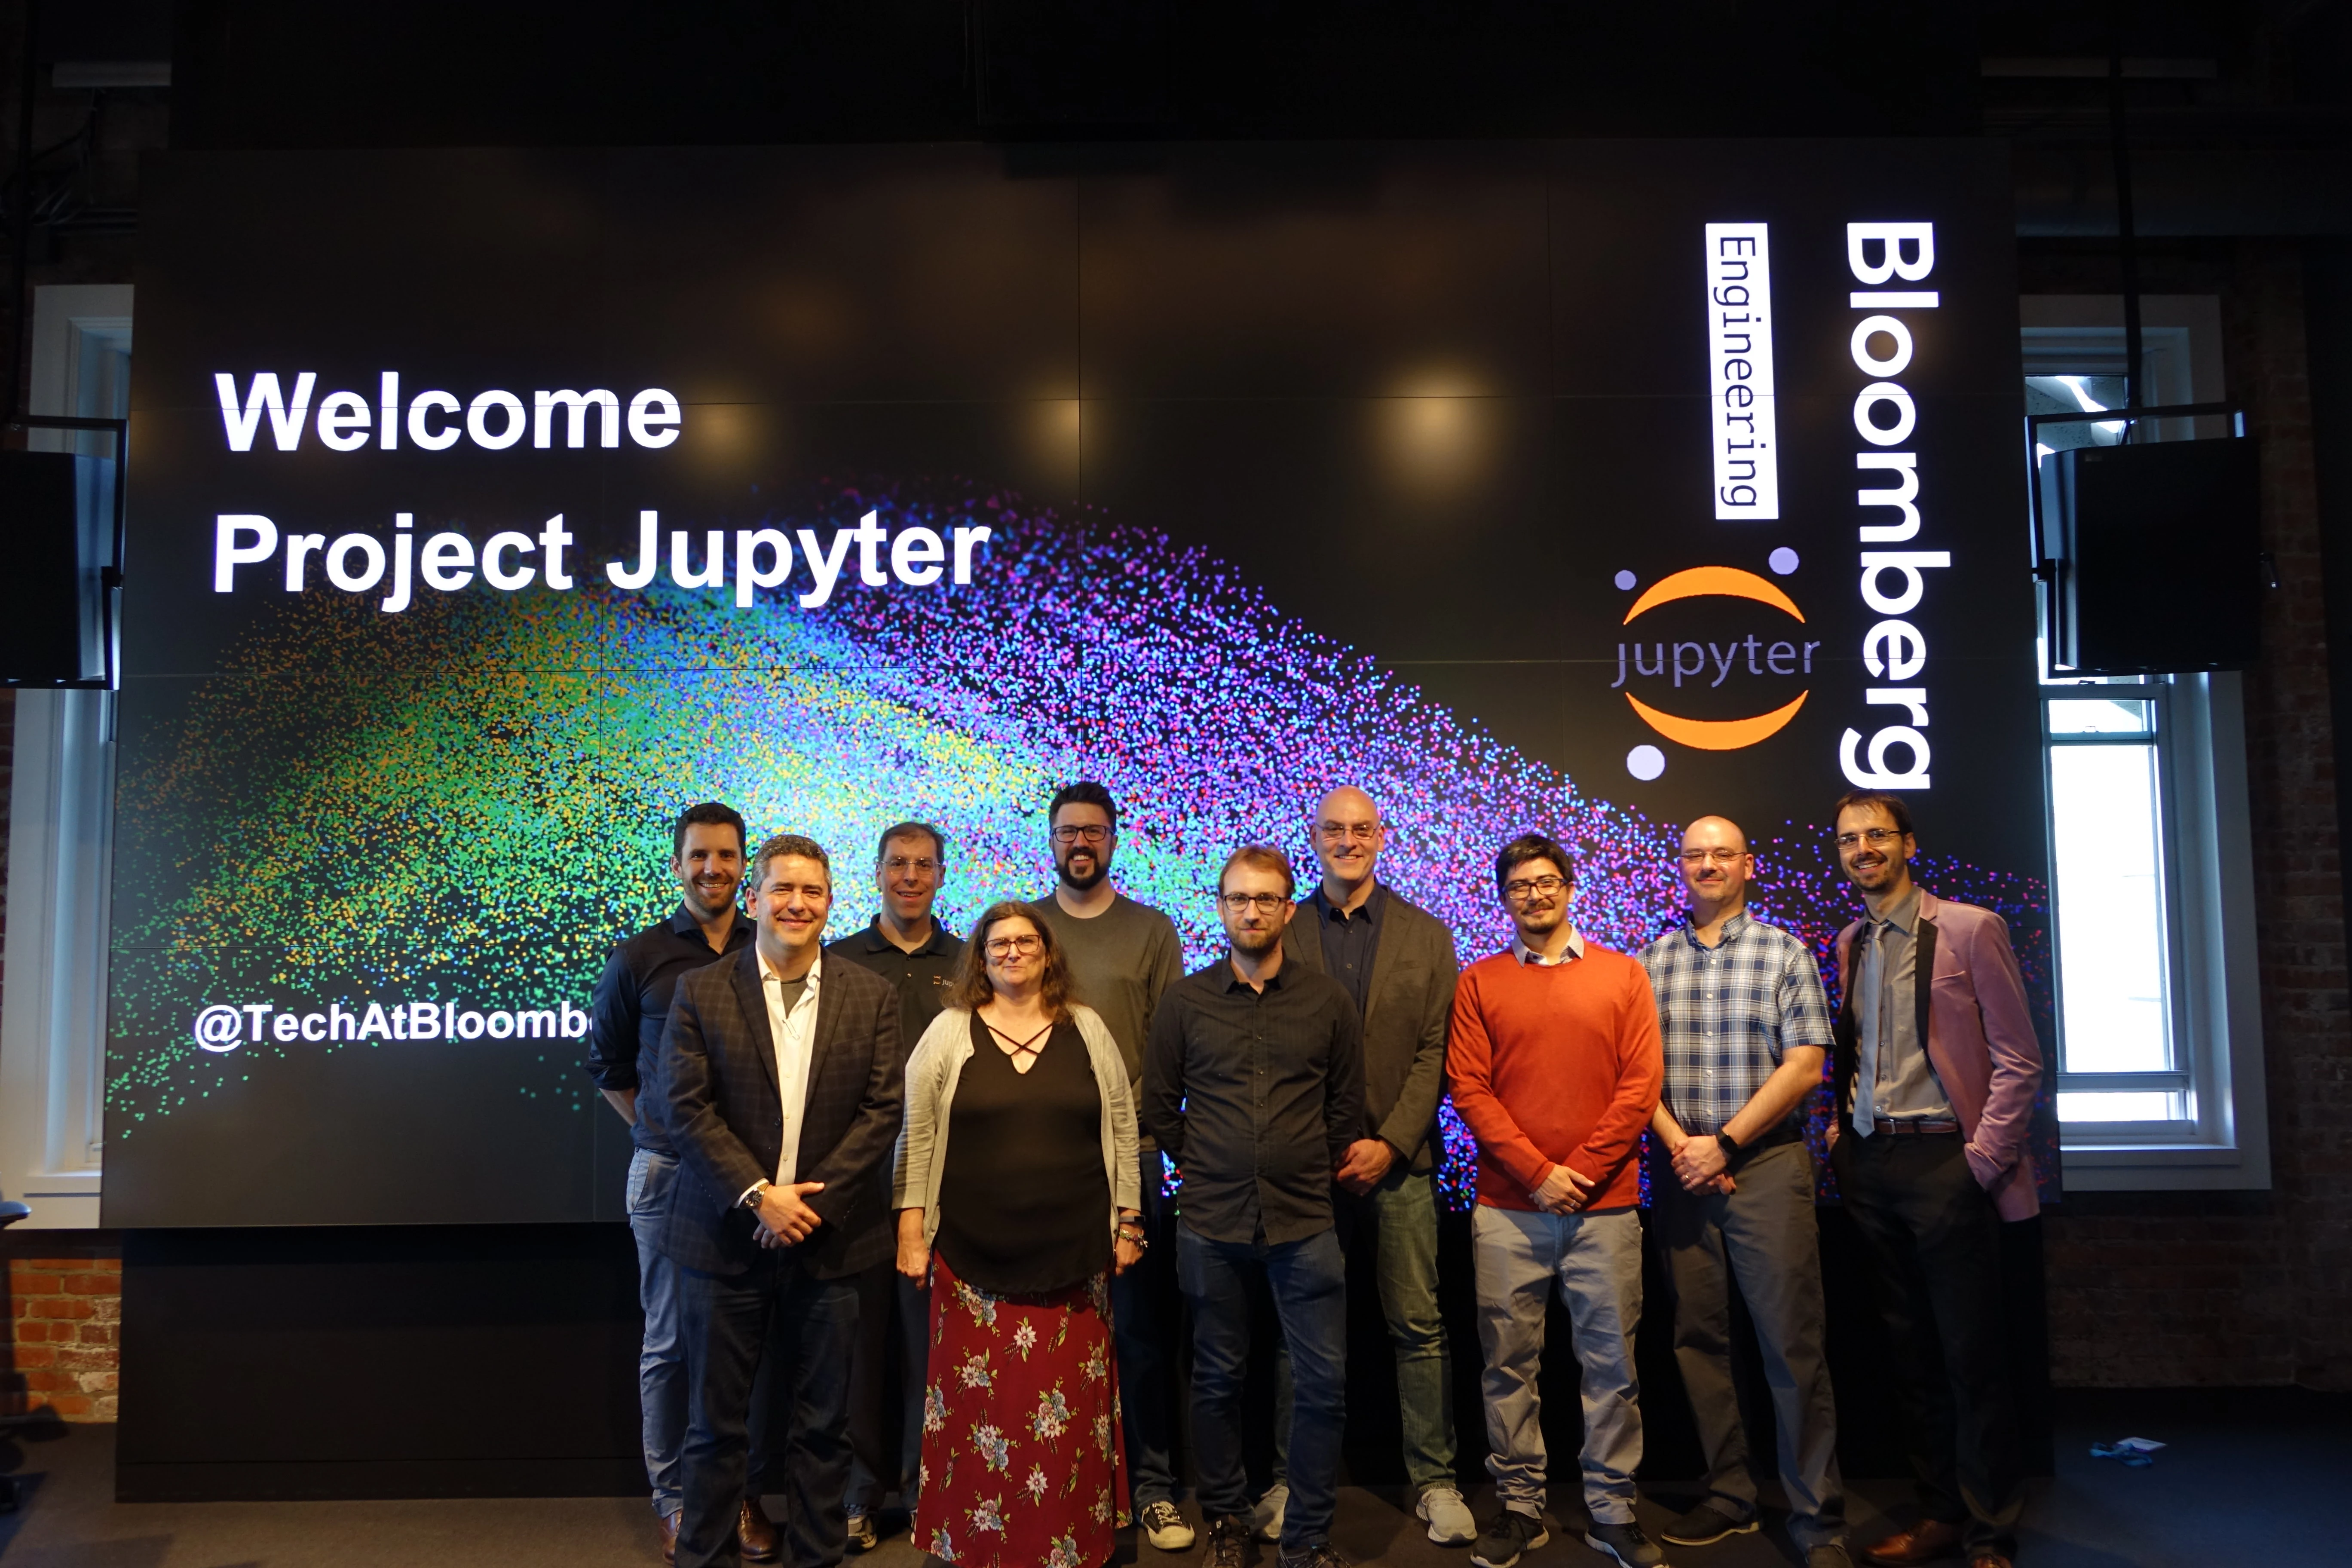 Members of the Project Jupyter Steering Council at Bloomberg Engineering's San Francisco office for a reception on Friday, June 22, 2018, in honor of their receiving the 2017 ACM Software System Award